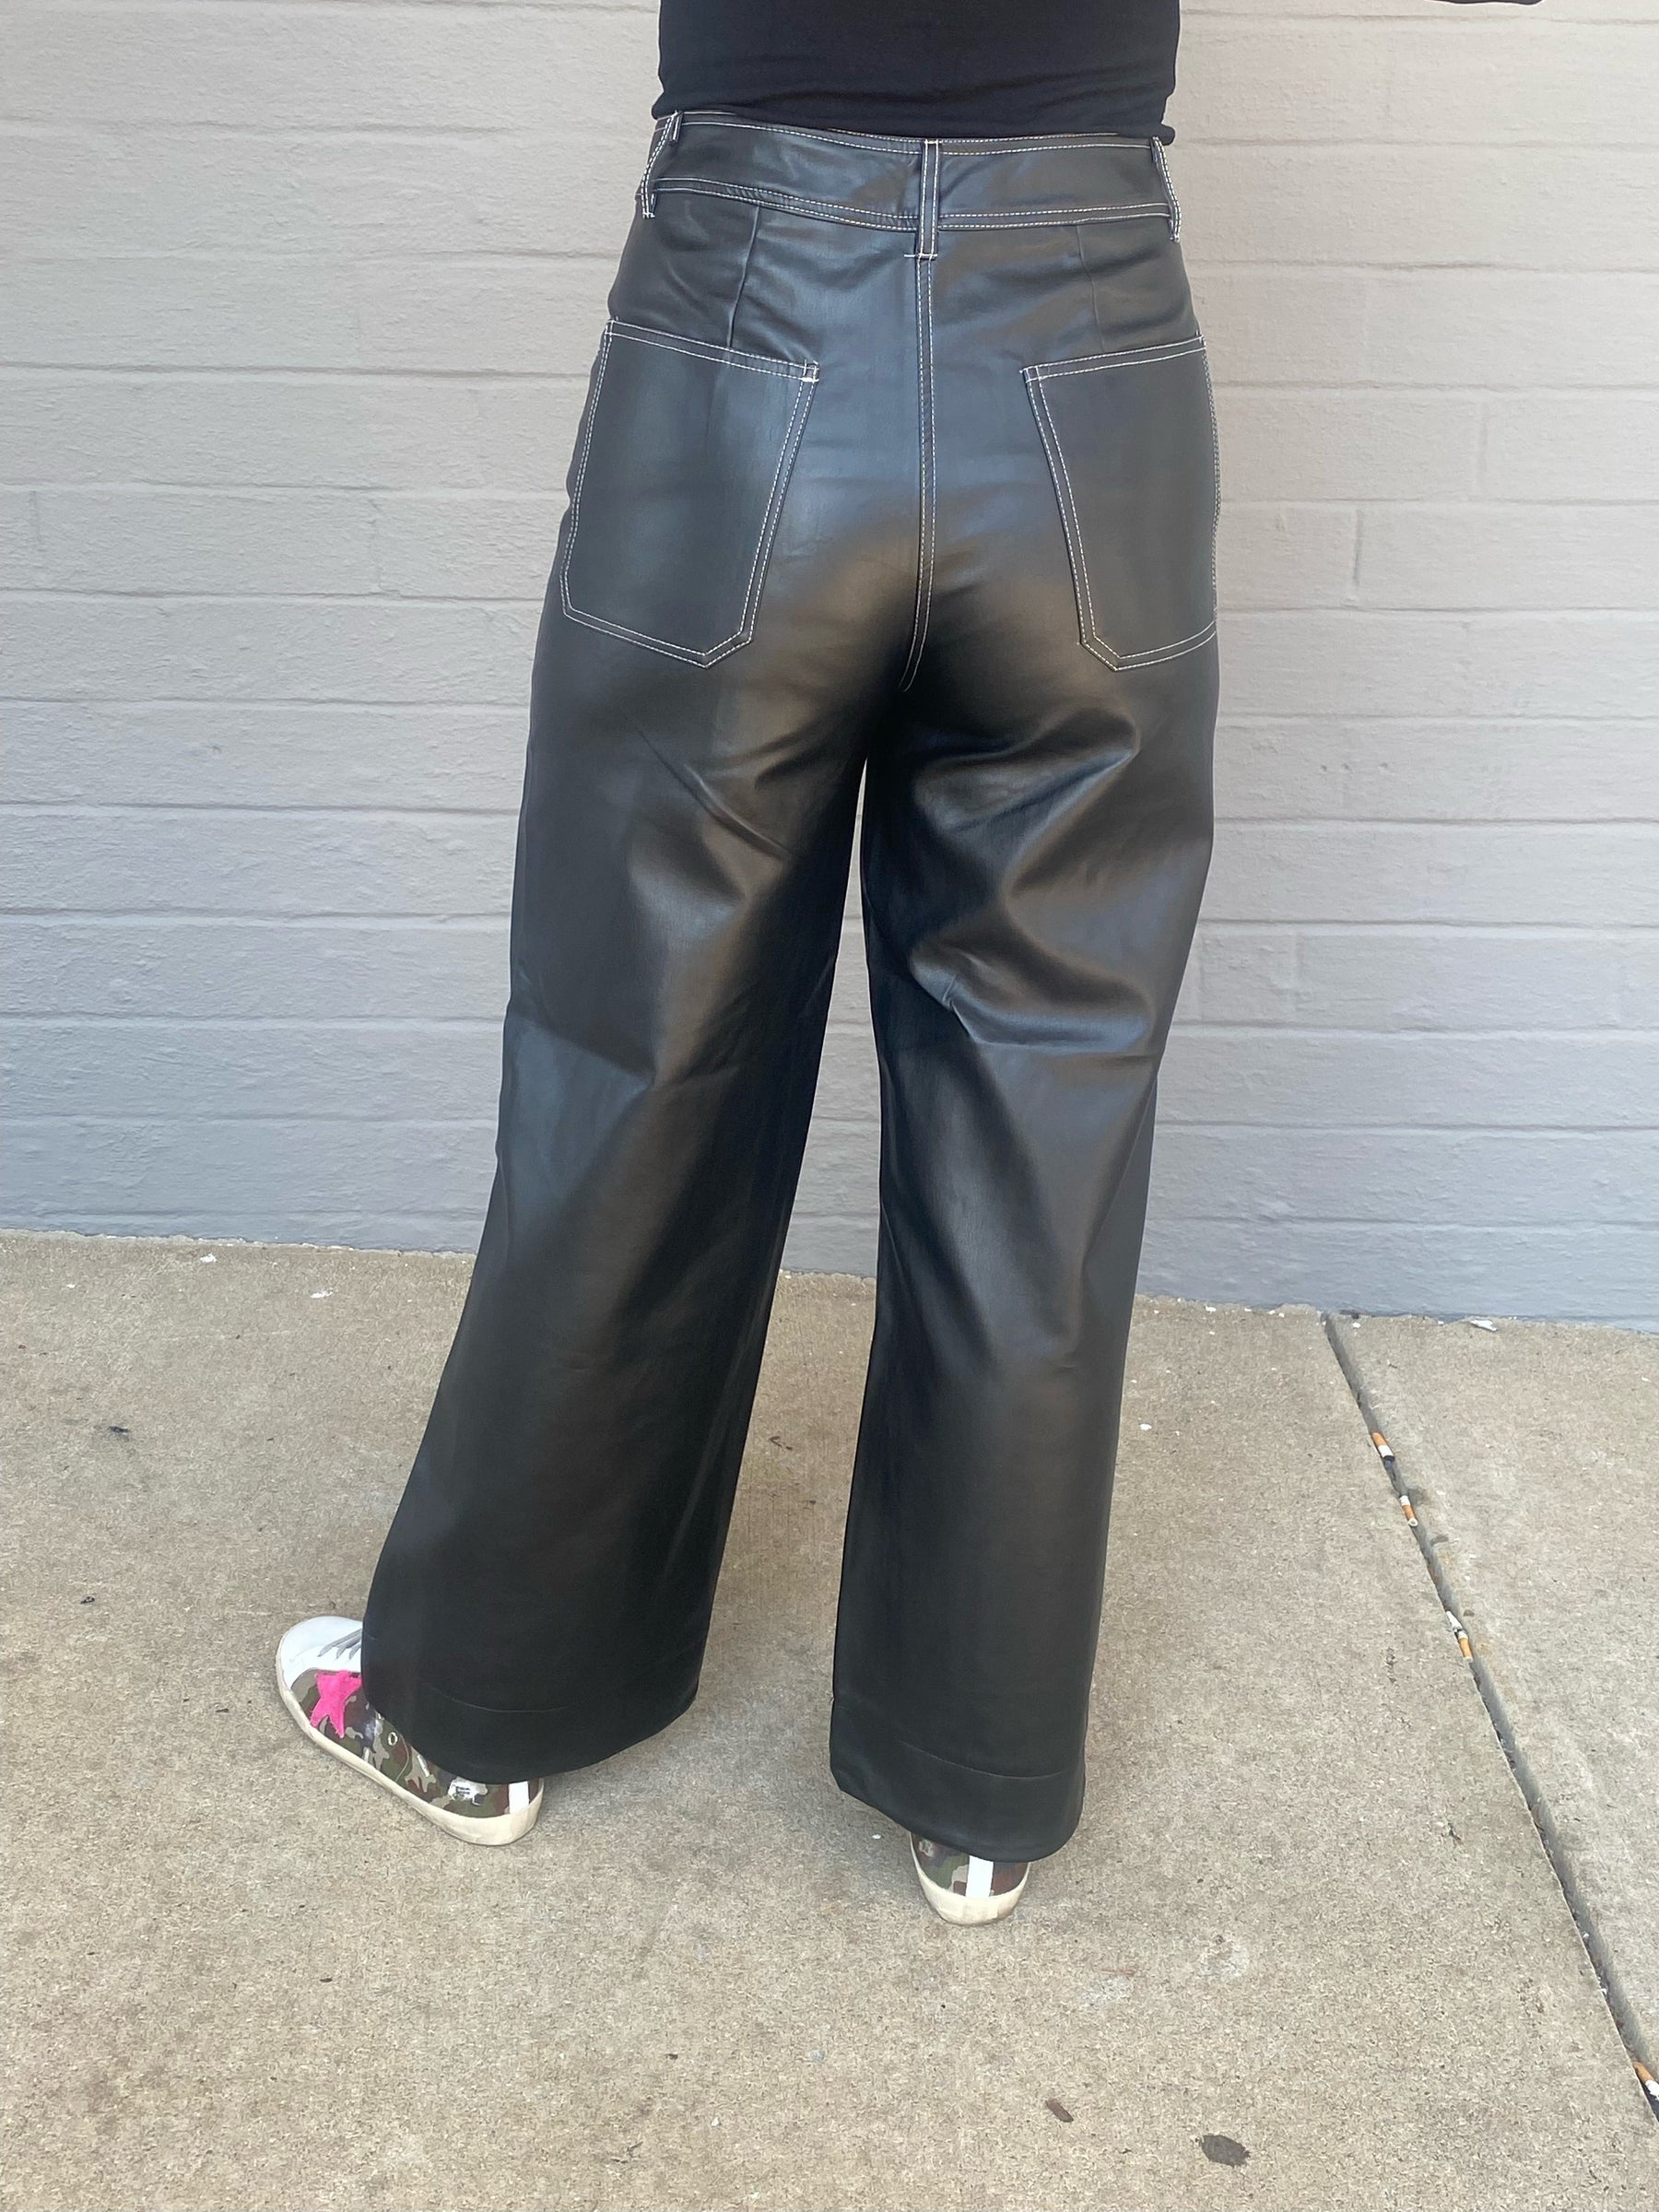 Womens black faux leather wide leg pants, wide stitching around waistband and pockets, high waisted, belt loops around waist, zipper and button closure, front and back pockets, back view